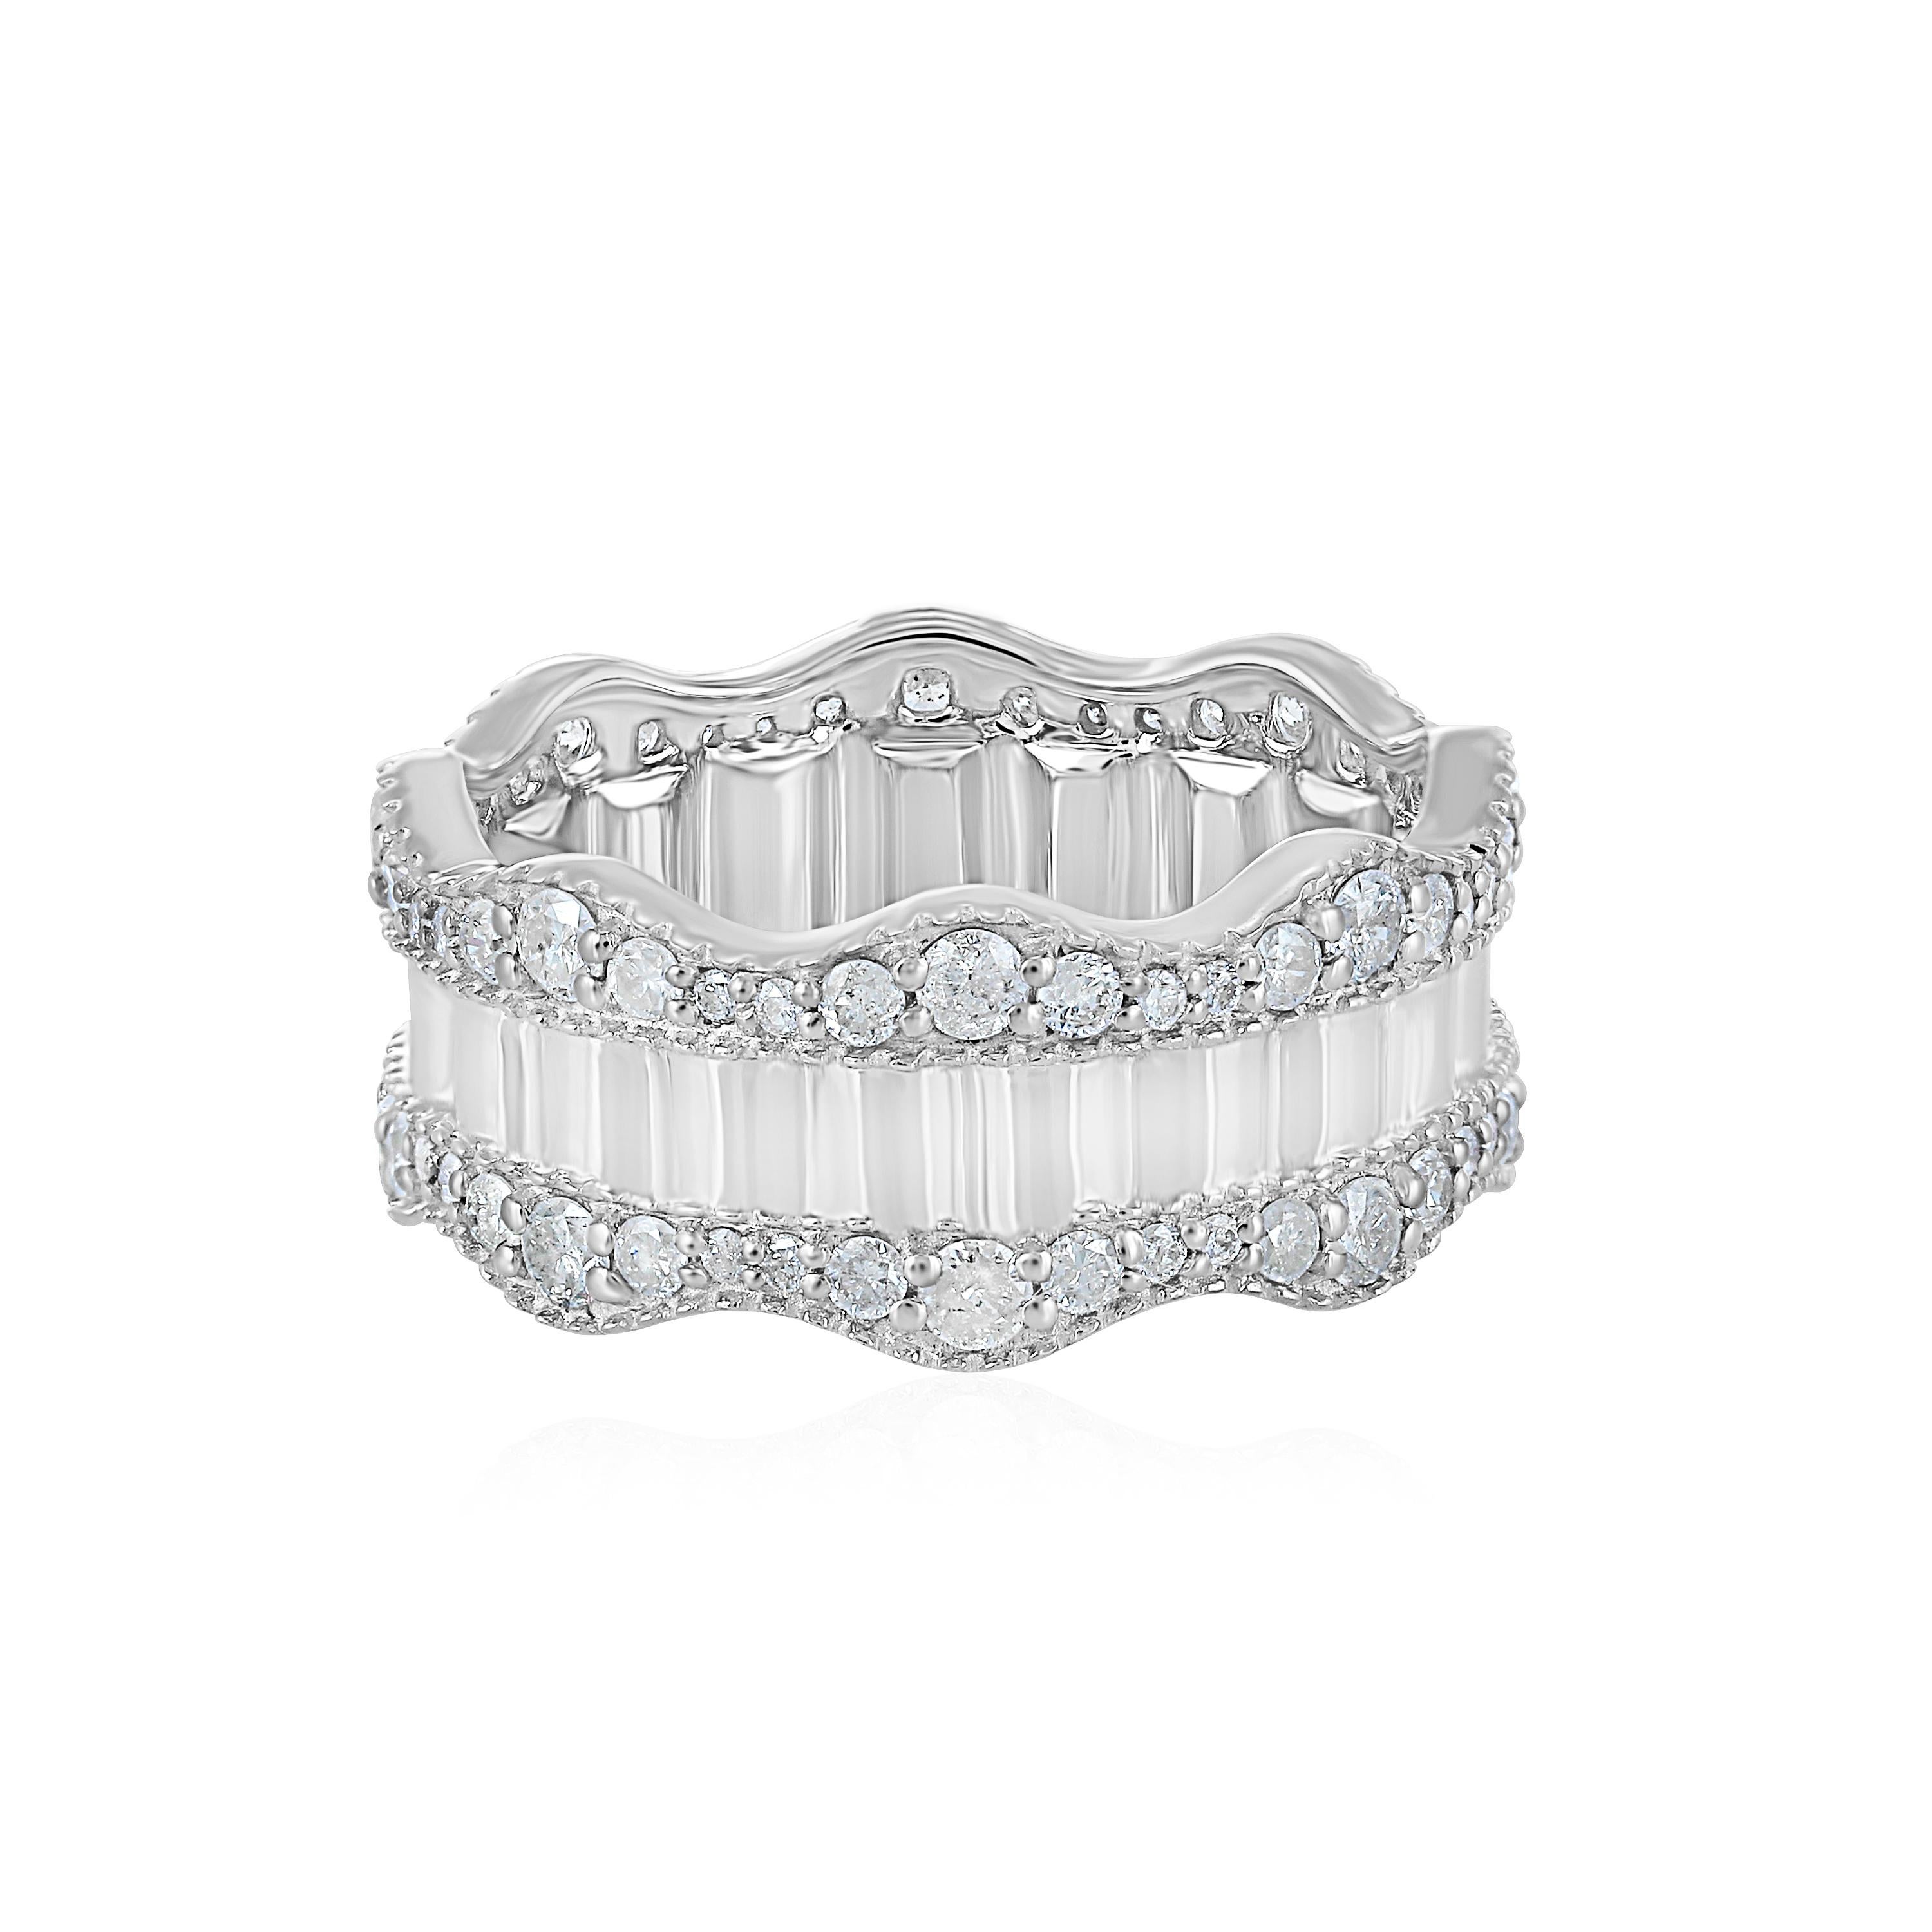 Make a glamours entry in this diamond eternity band ring by Gemistry. The band features an impressive 1.22 ct. t.w. round, brilliant cut diamonds that are prong set on 925 sterling silver band. The baguette shaped impression on the silver at the